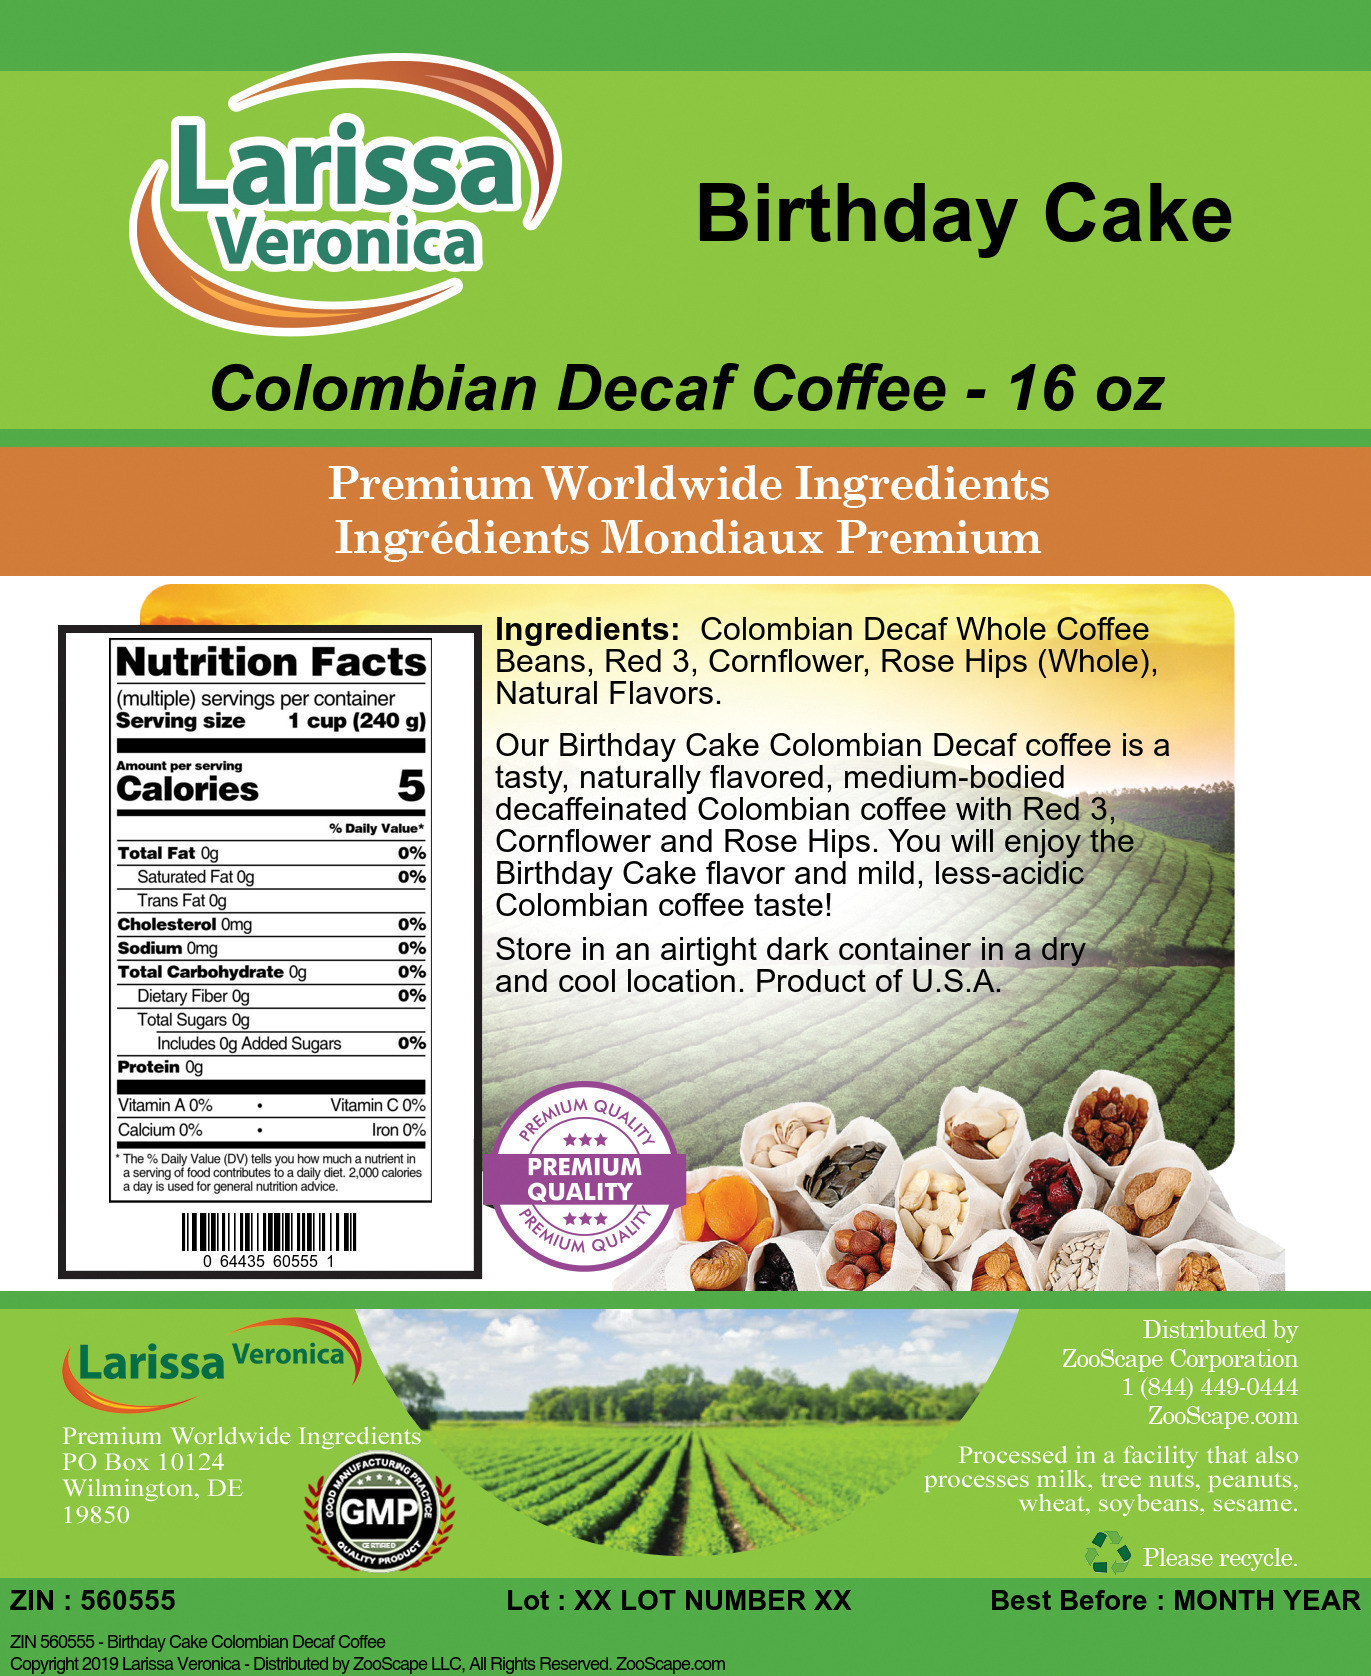 Birthday Cake Colombian Decaf Coffee - Label